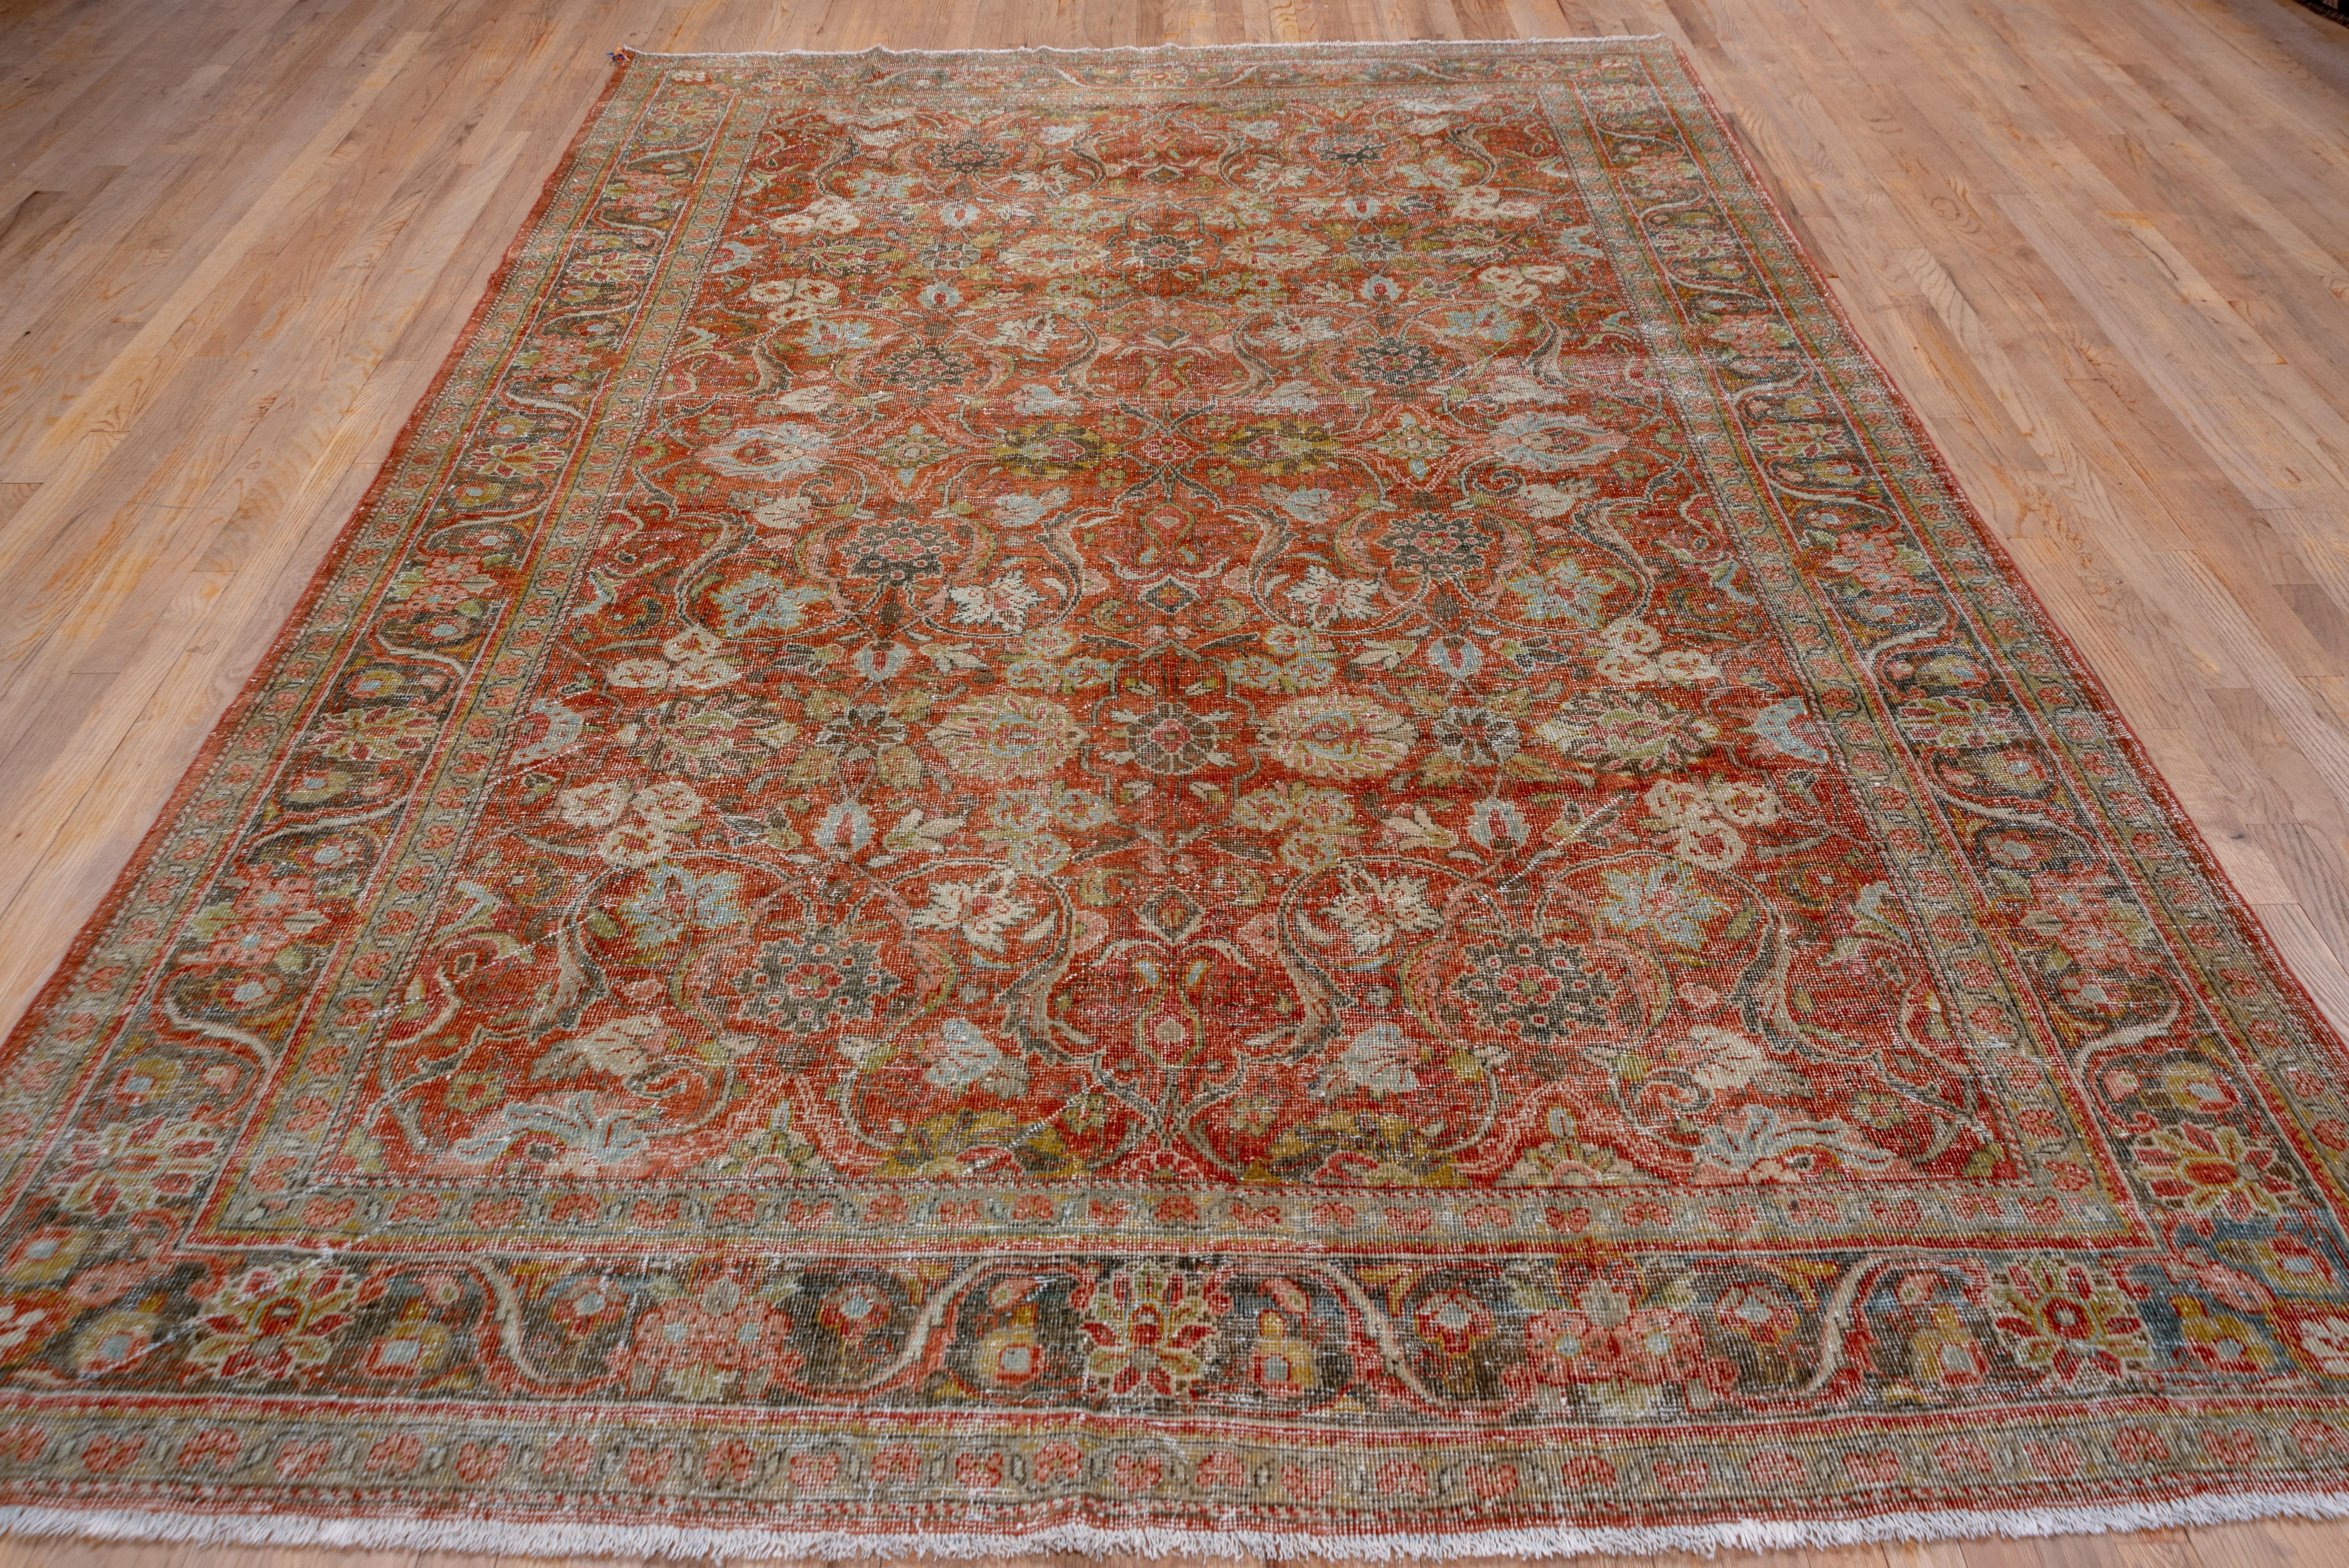 Hand-Knotted Antique Persian Mahal Area Rug, Rust Allover Field, circa 1930s